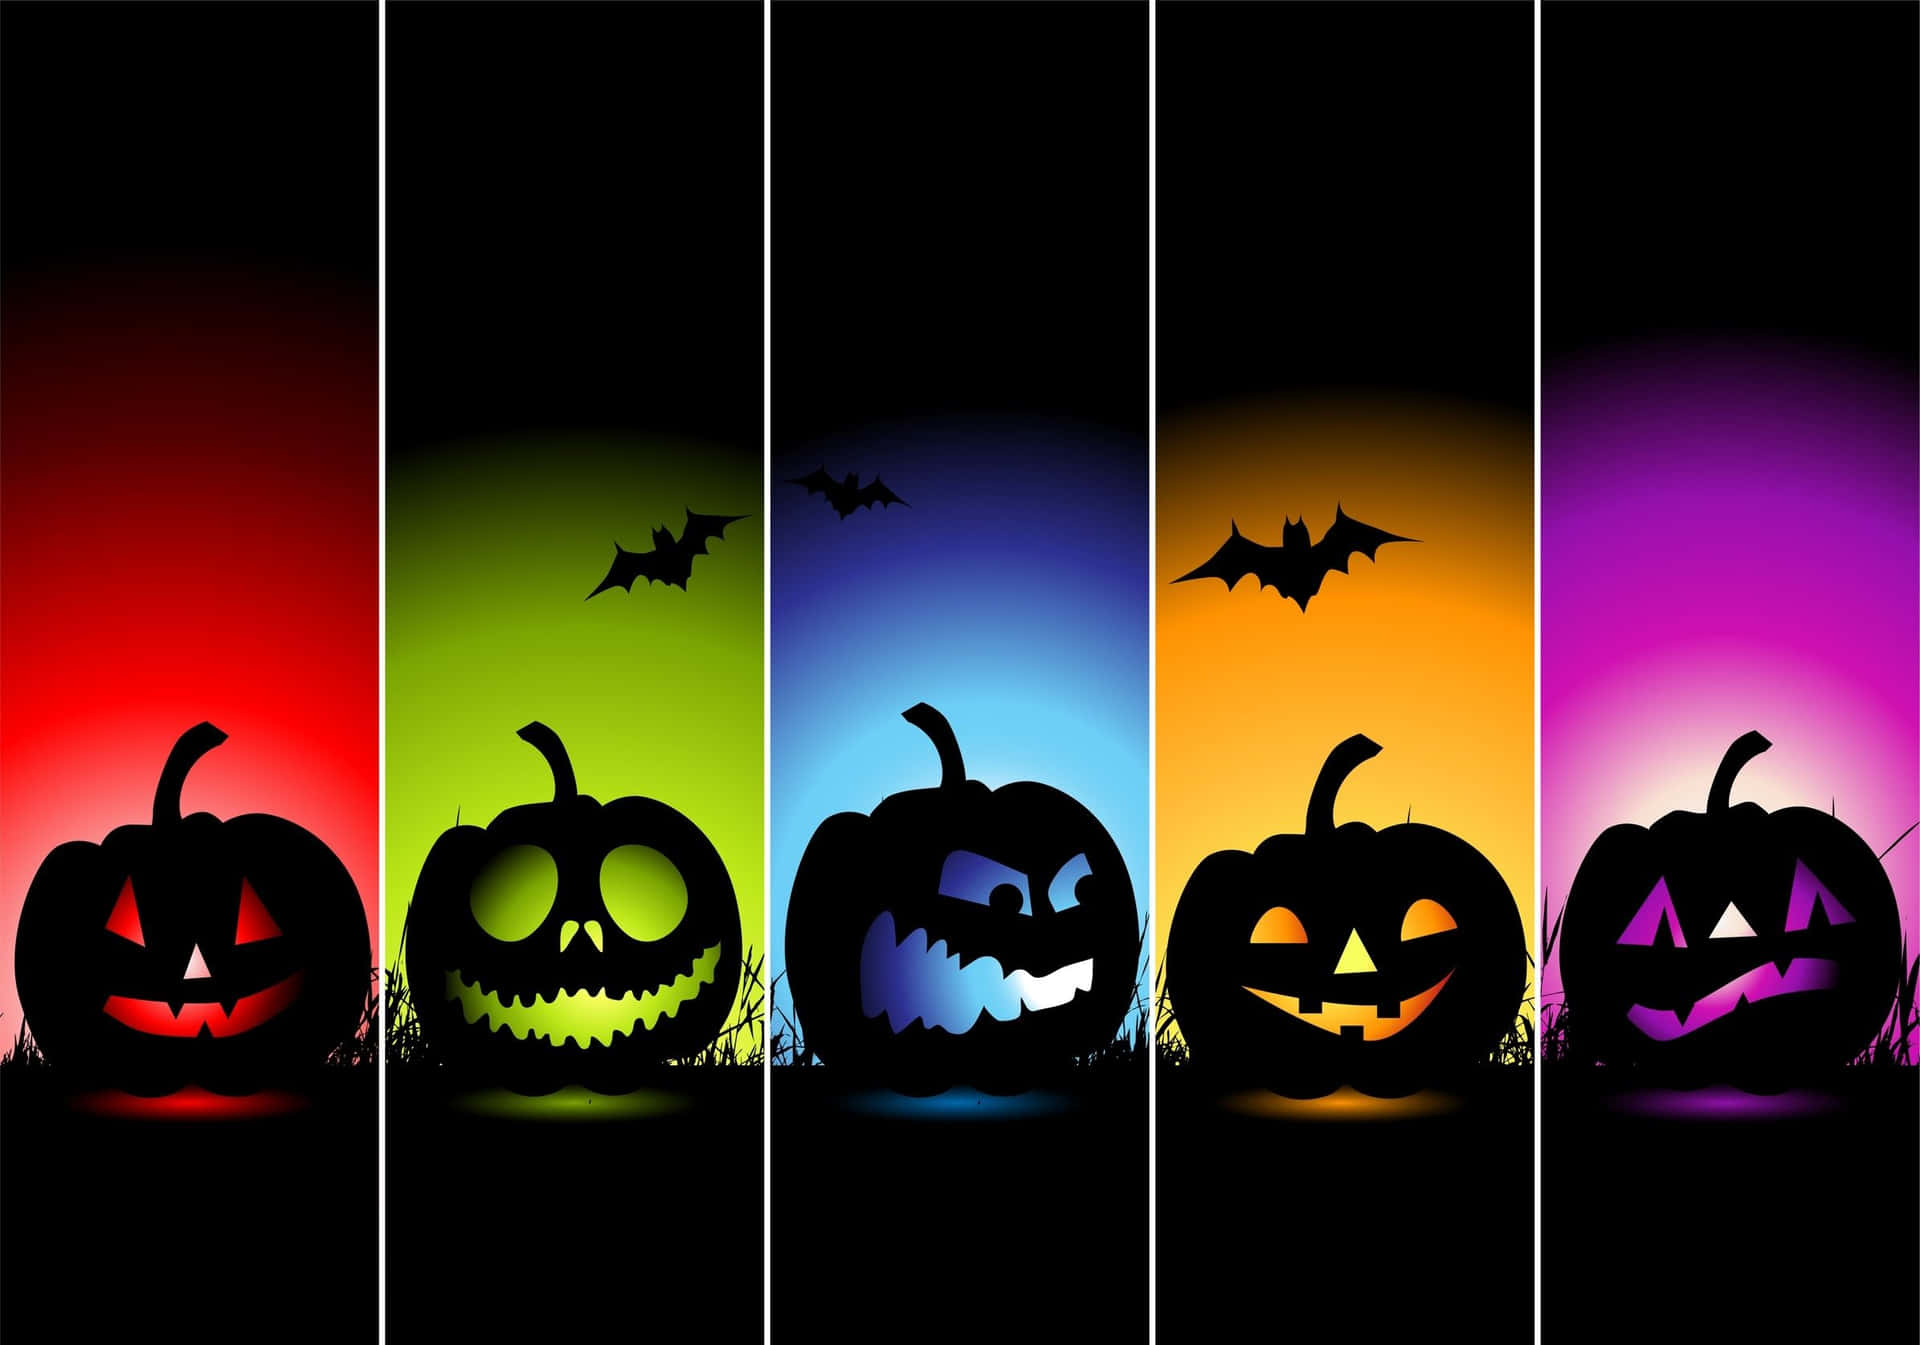 Get ready for some spooky fun this Halloween! Wallpaper